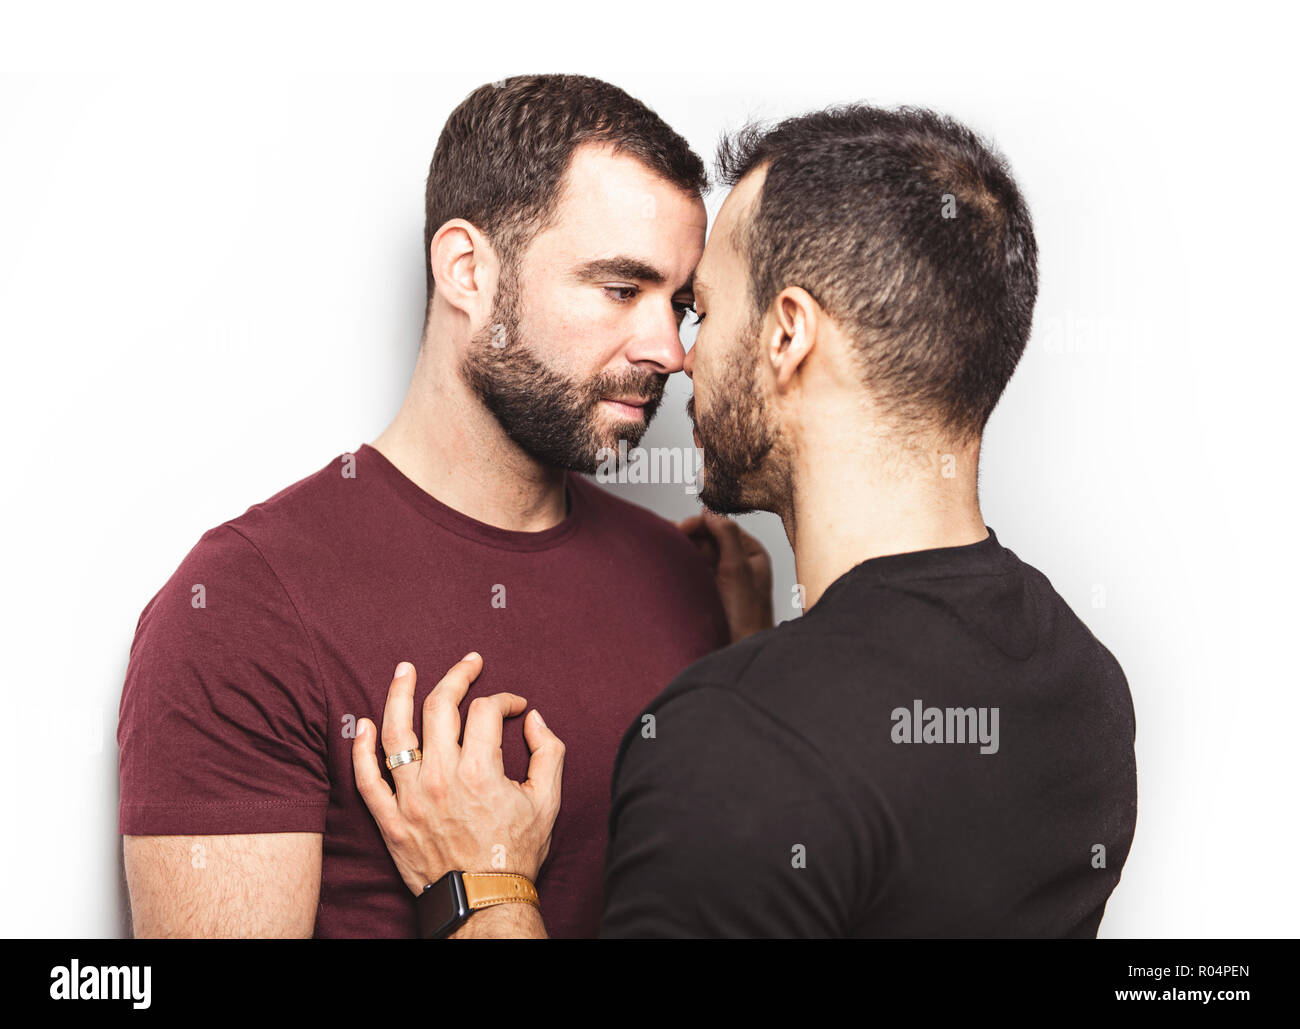 young-homosexuals-gay-couple-love-each-other-on-a-white-background-R04PEN.jpg